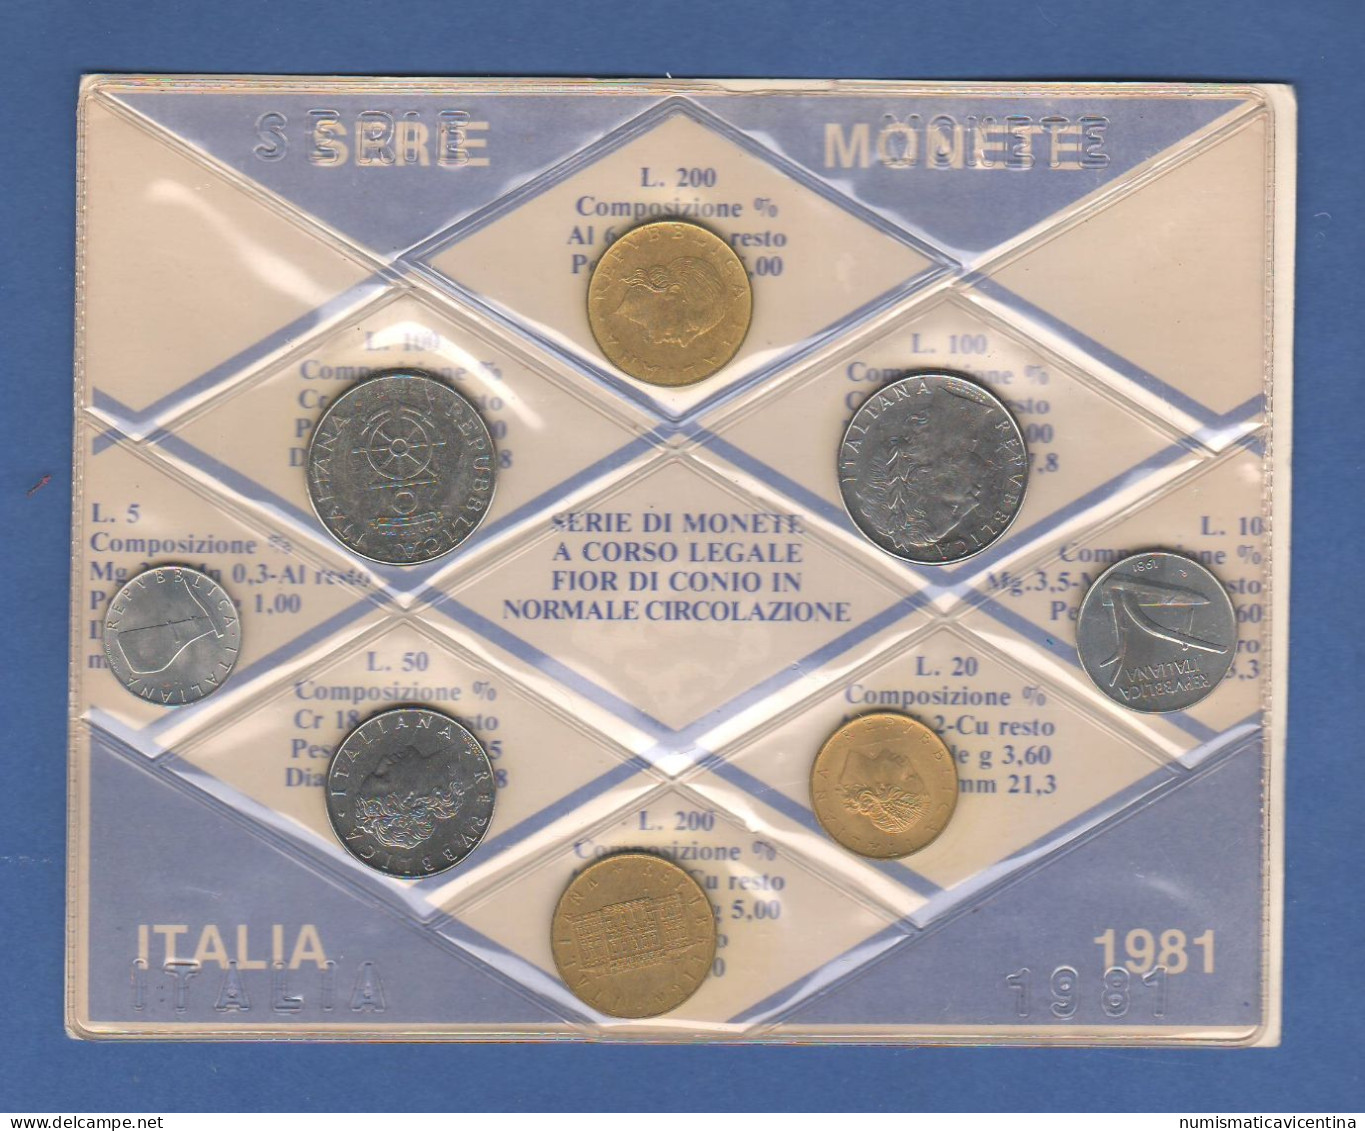 ITALIA 1981 Serie 8 Monete 5 10 20 50 100 100 200 200 Lire FDC UNC Italy Coin Set Private Issues Emissioni Private - Mint Sets & Proof Sets